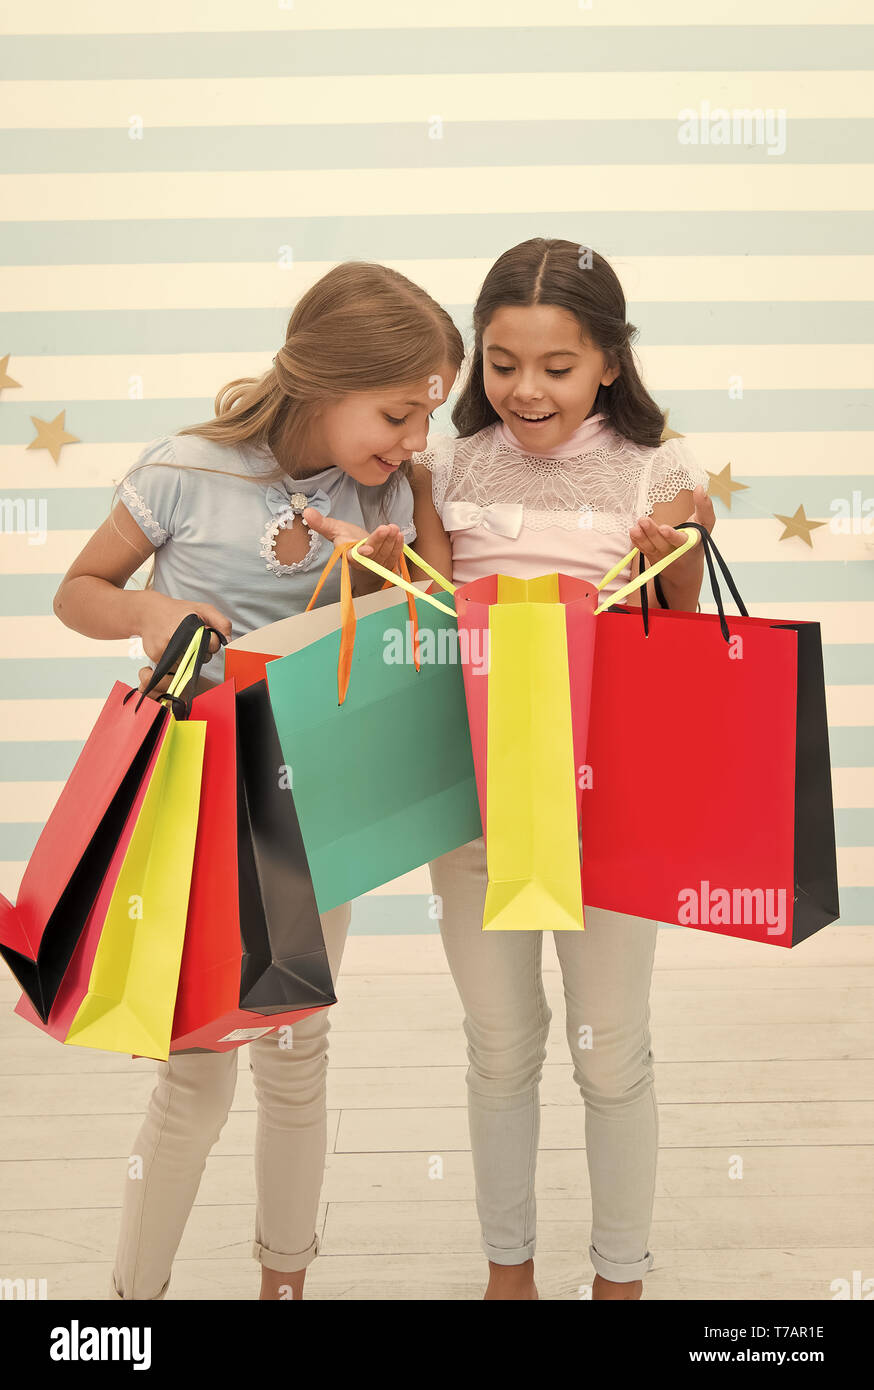 Black Friday At School Market Happy Small Kids Girls With Shopping Bags After Black Friday Sale Small Kids With Purchase From School Market Go Shopping Best Discounts And Promo Codes Stock Photo